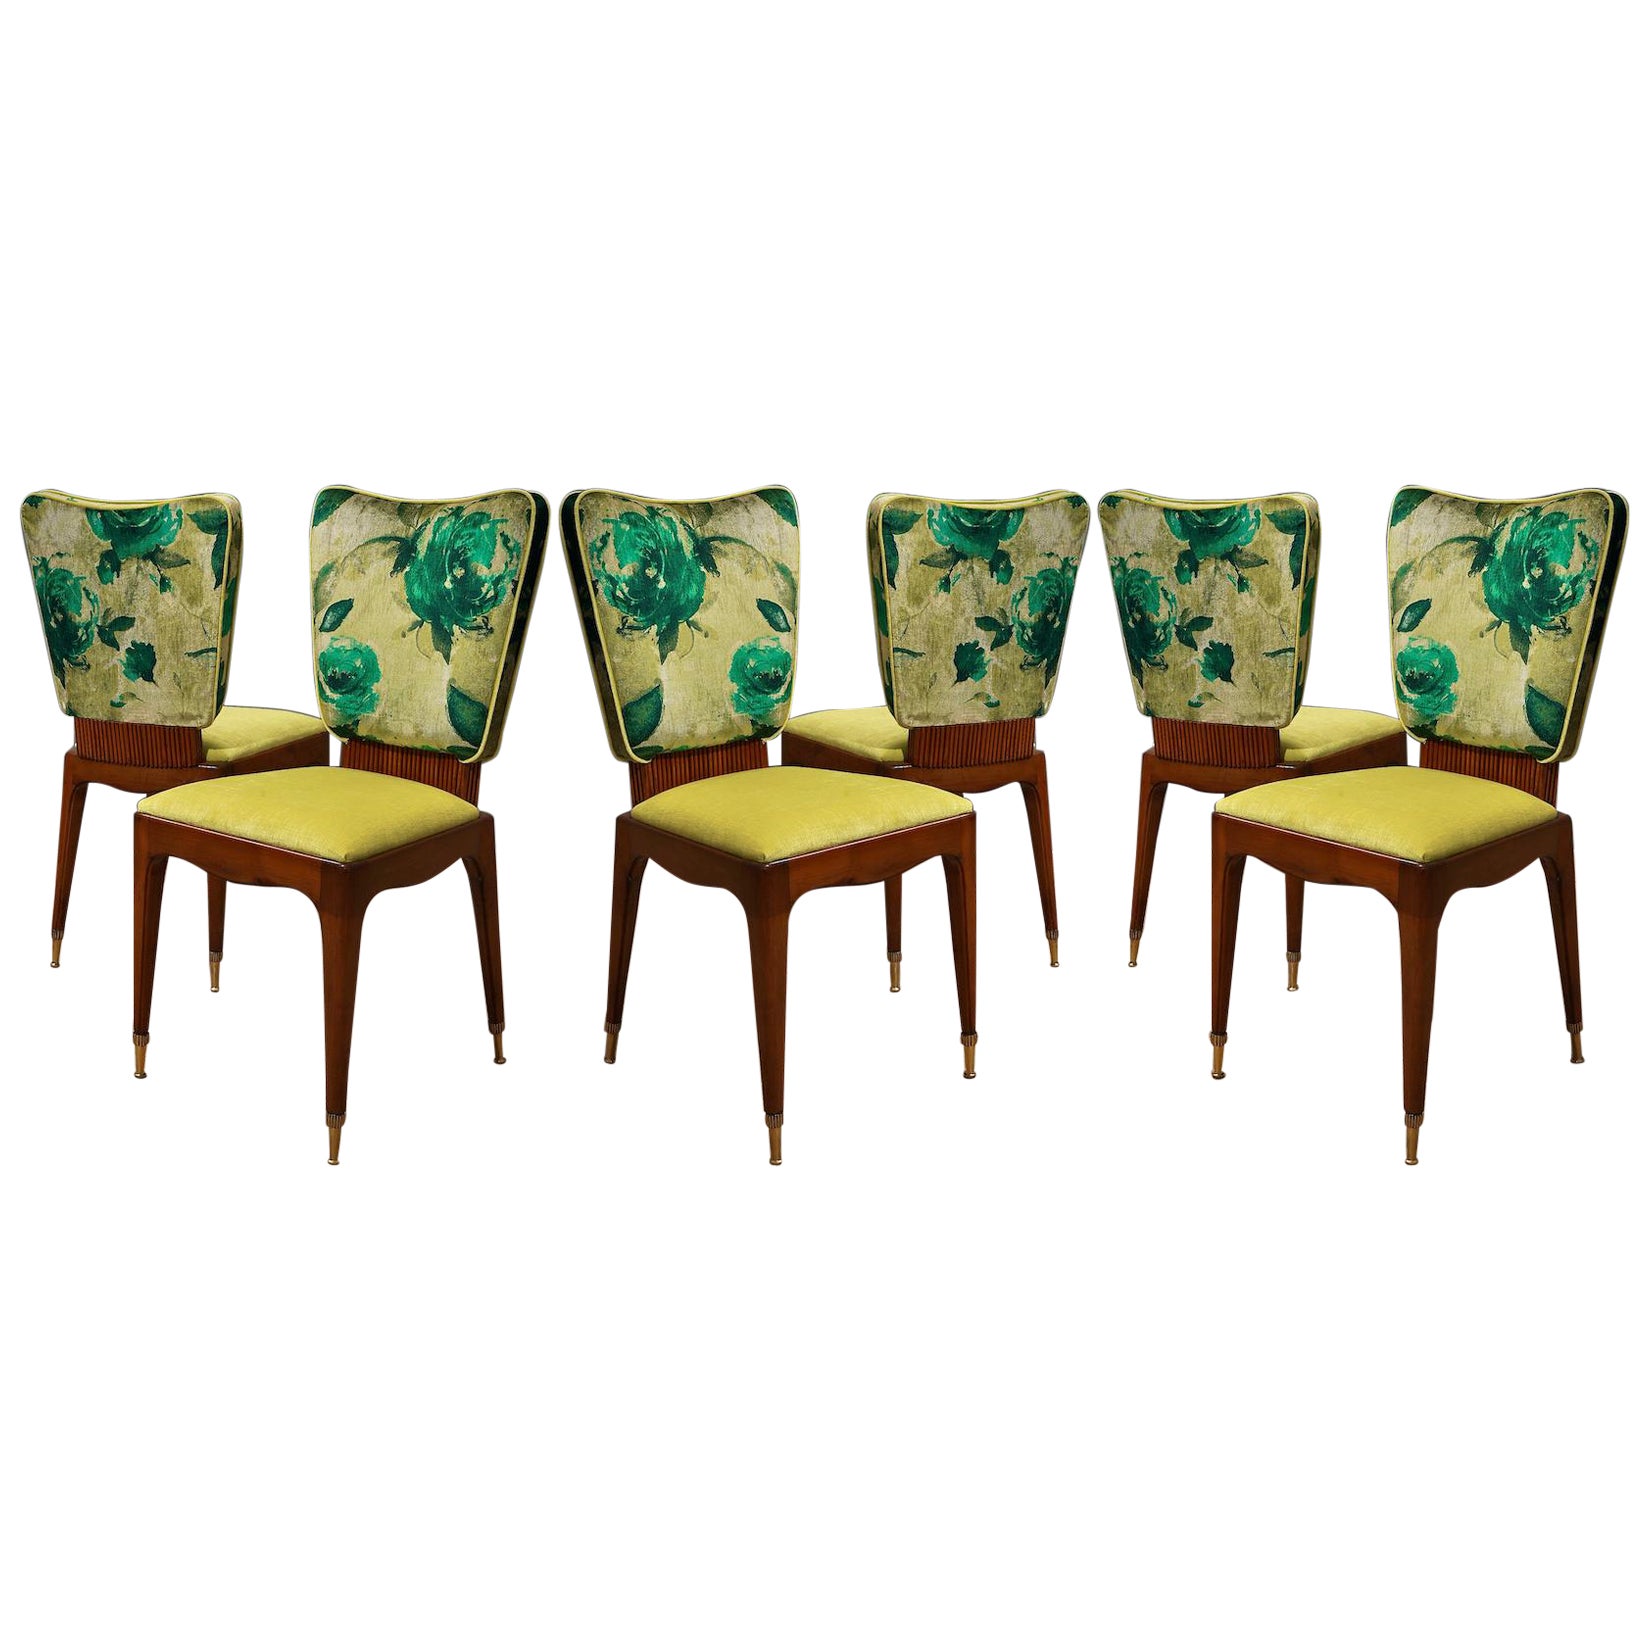 Osvaldo Borsani Attributed Cherry Wood and Floral Fabric Six Chairs, 1950 For Sale